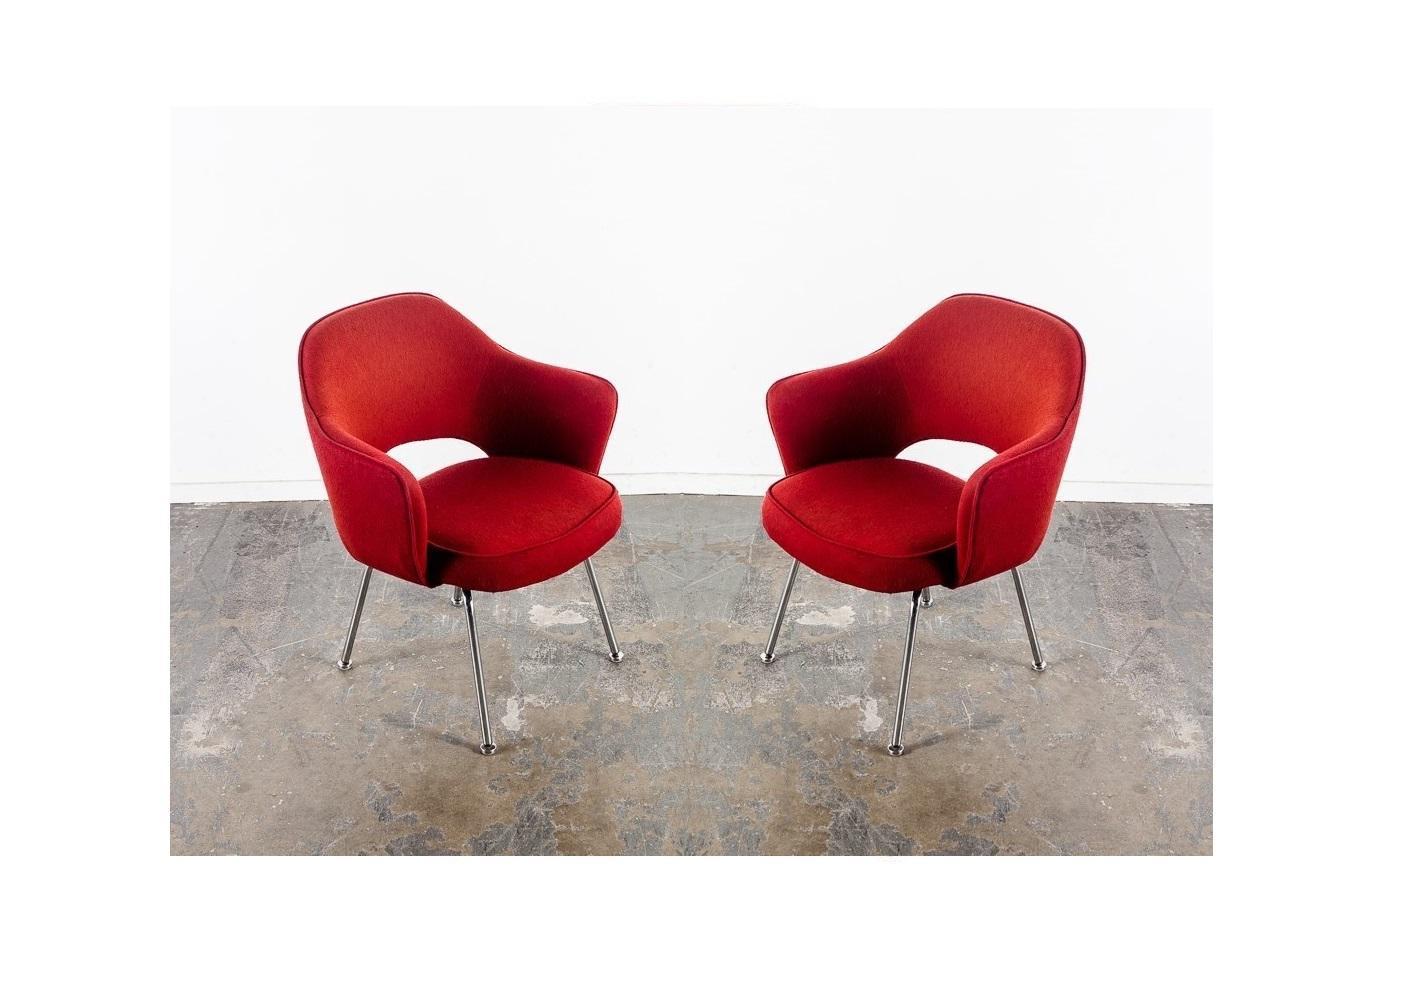 Eero Saarinen (1910–1961) was a Finnish-American architect and Industrial designer of the 20th century. Featured in nearly all Florence Knoll-designed interiors, the Saarinen Model 71 Executive armchair manufactured by Knoll Furniture has remained